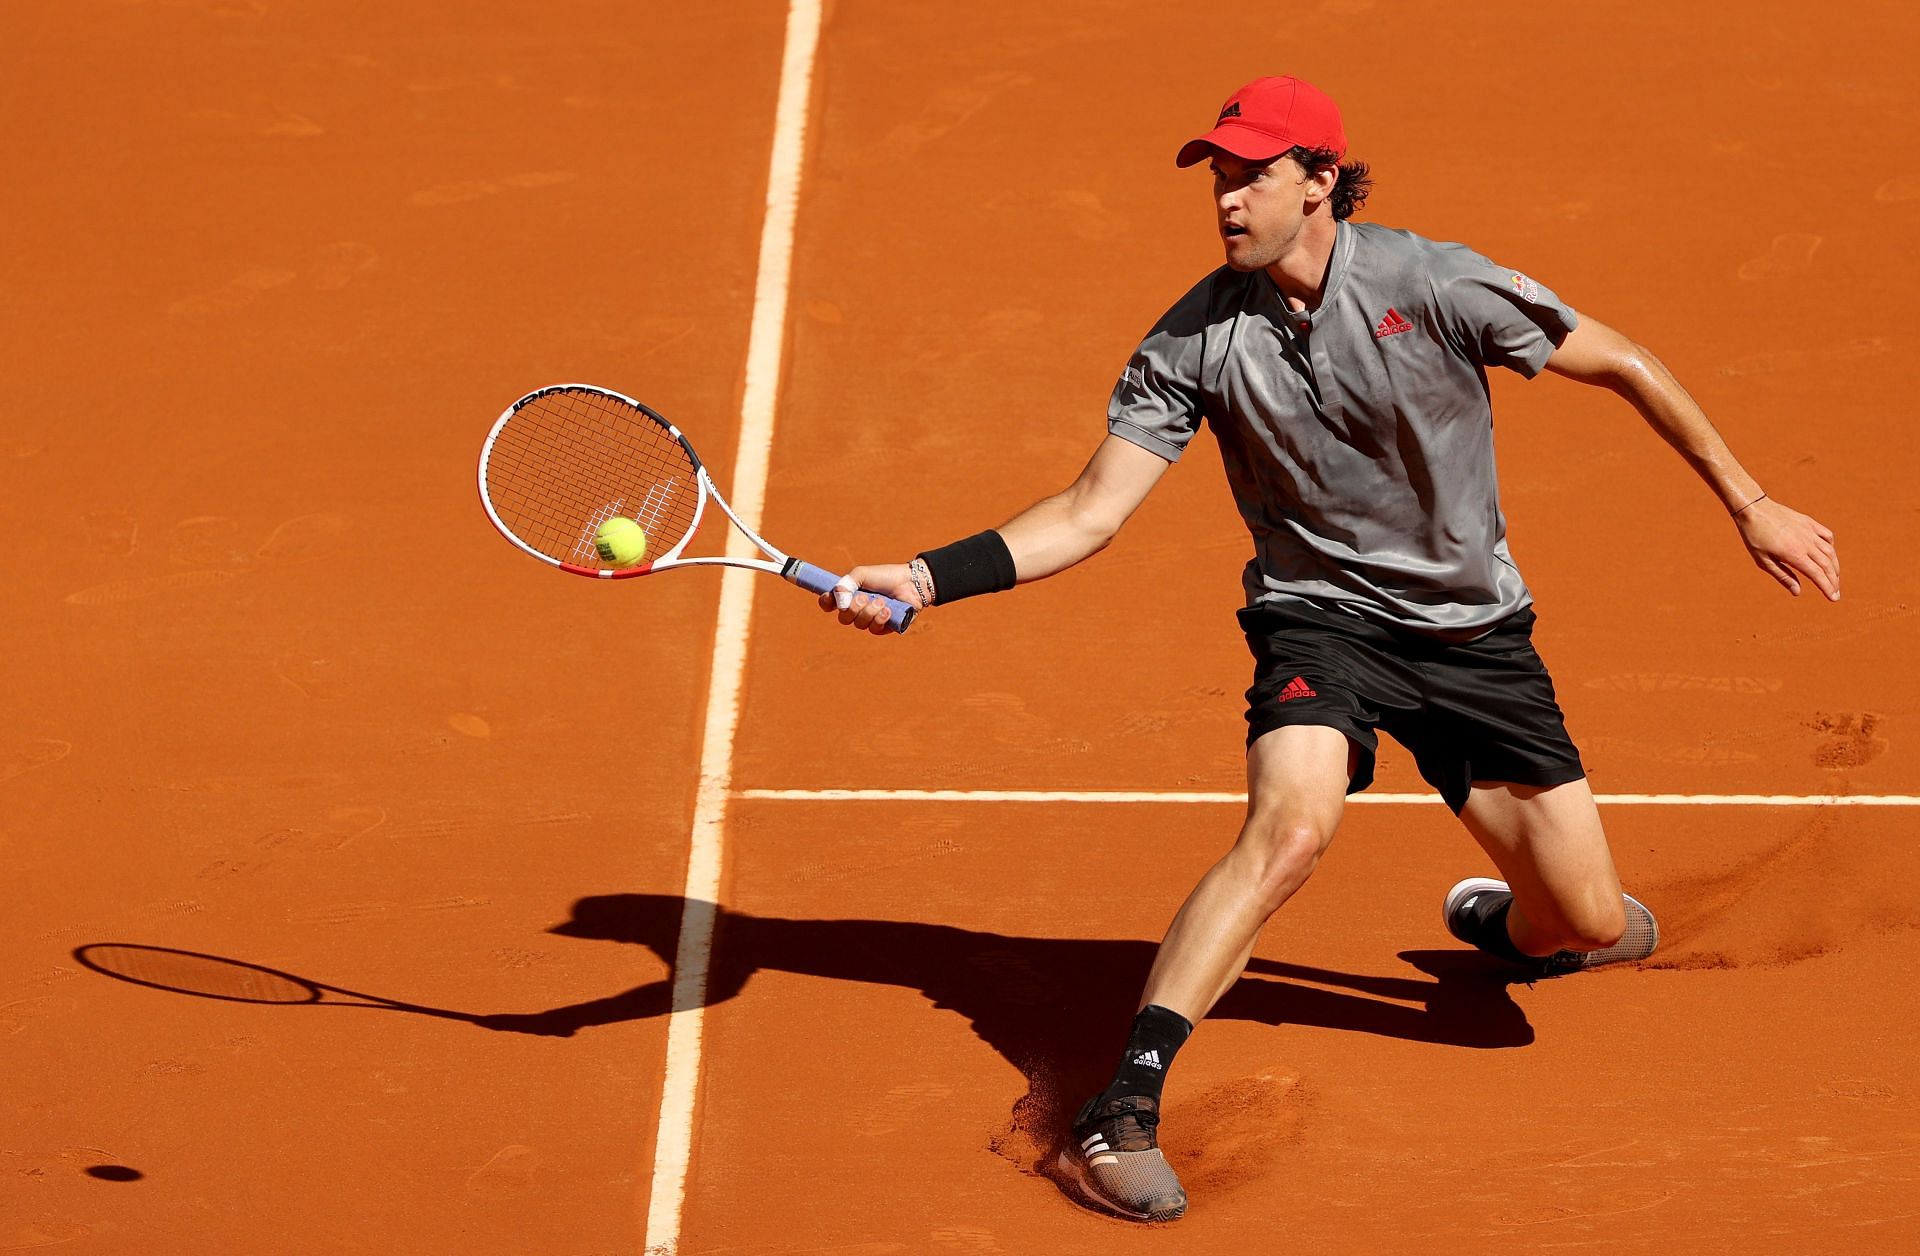 Dominic Thiem at the 2021 Mutua Madrid Open - Day Eight